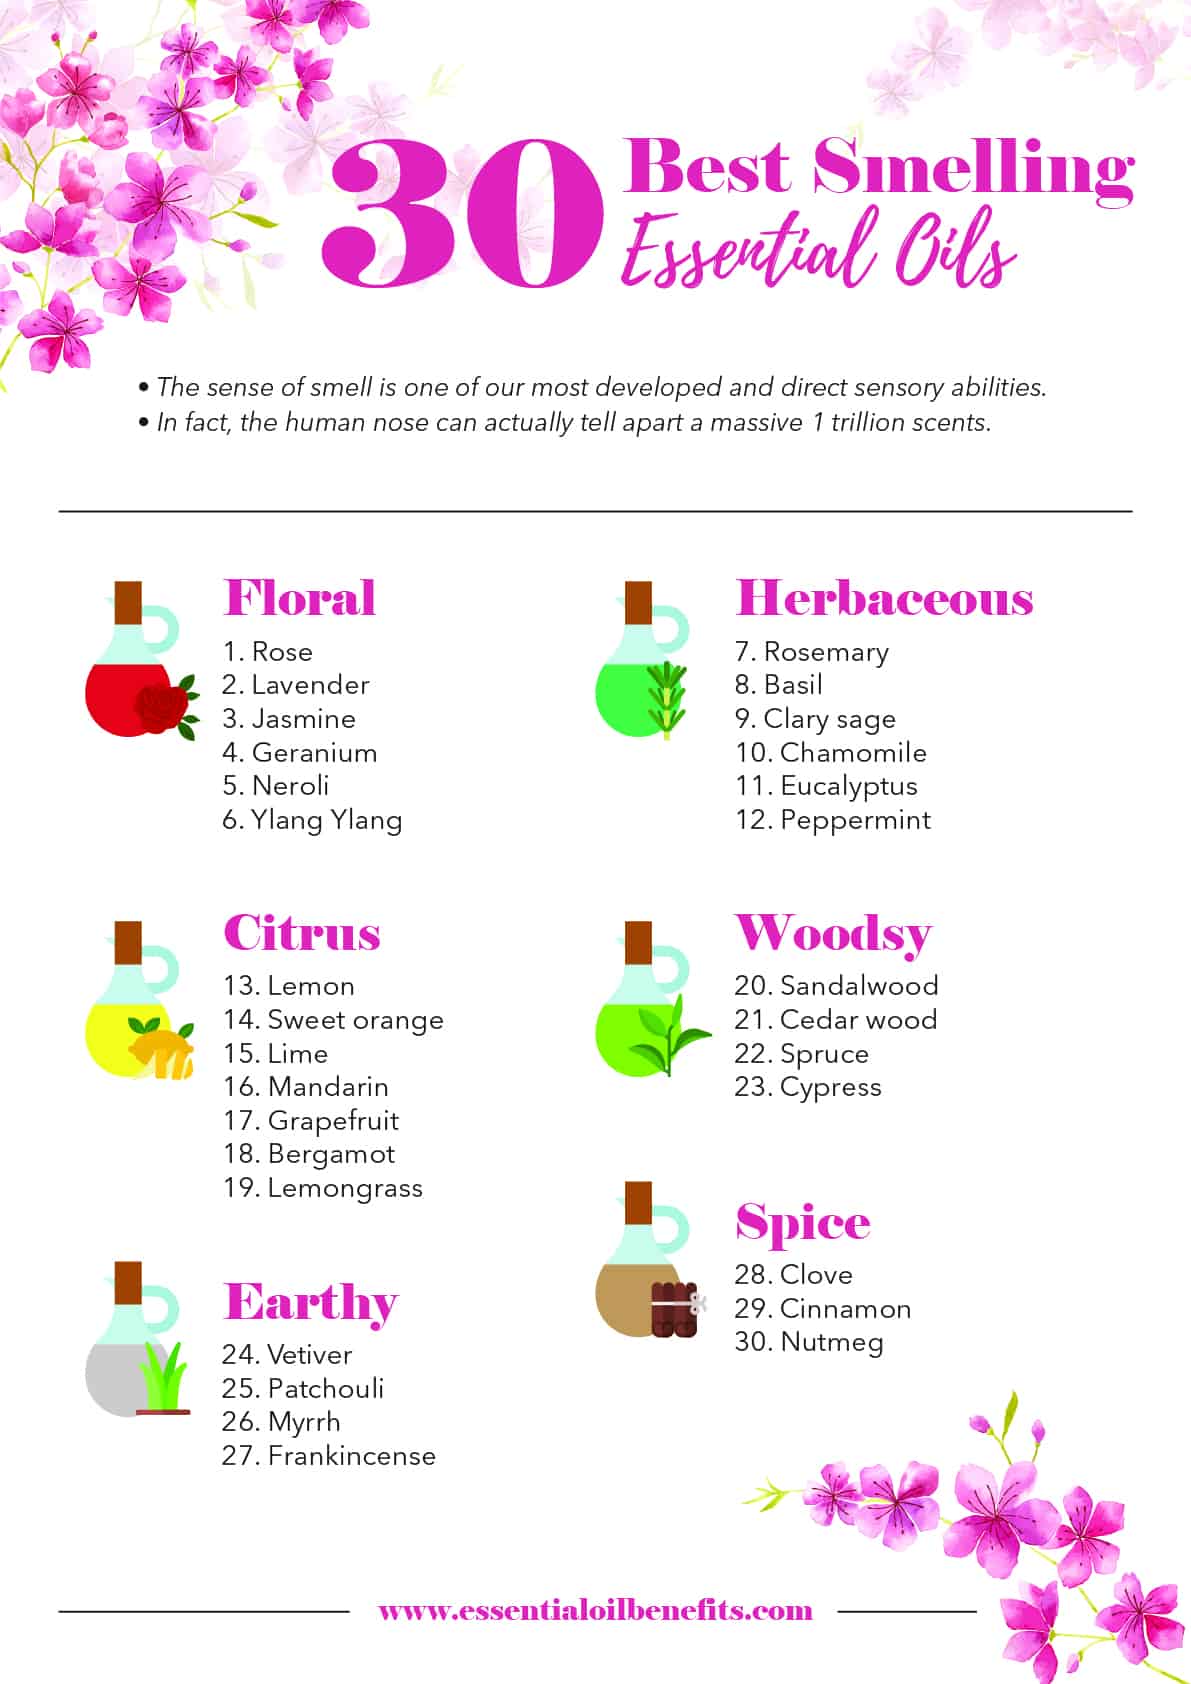 The Ultimate List of 30 Best Smelling Essential Oils! Essential Oil Benefits